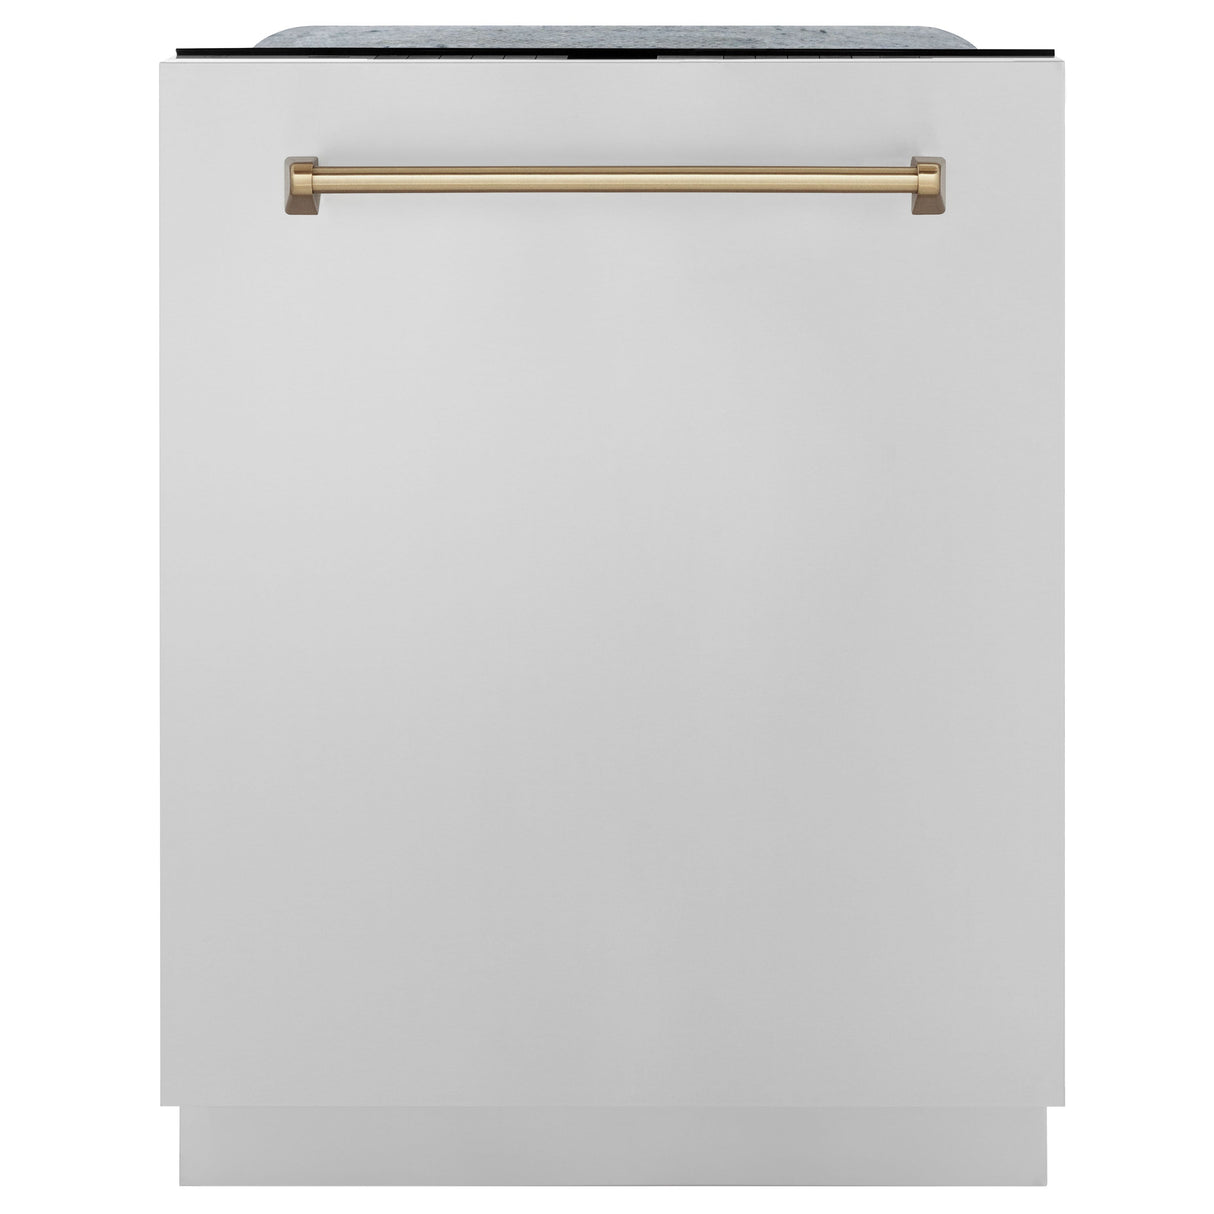 ZLINE Autograph Edition 24 in. 3rd Rack Top Touch Control Tall Tub Dishwasher in Stainless Steel with Champagne Bronze Handle, 45dBa (DWMTZ-304-24-CB)